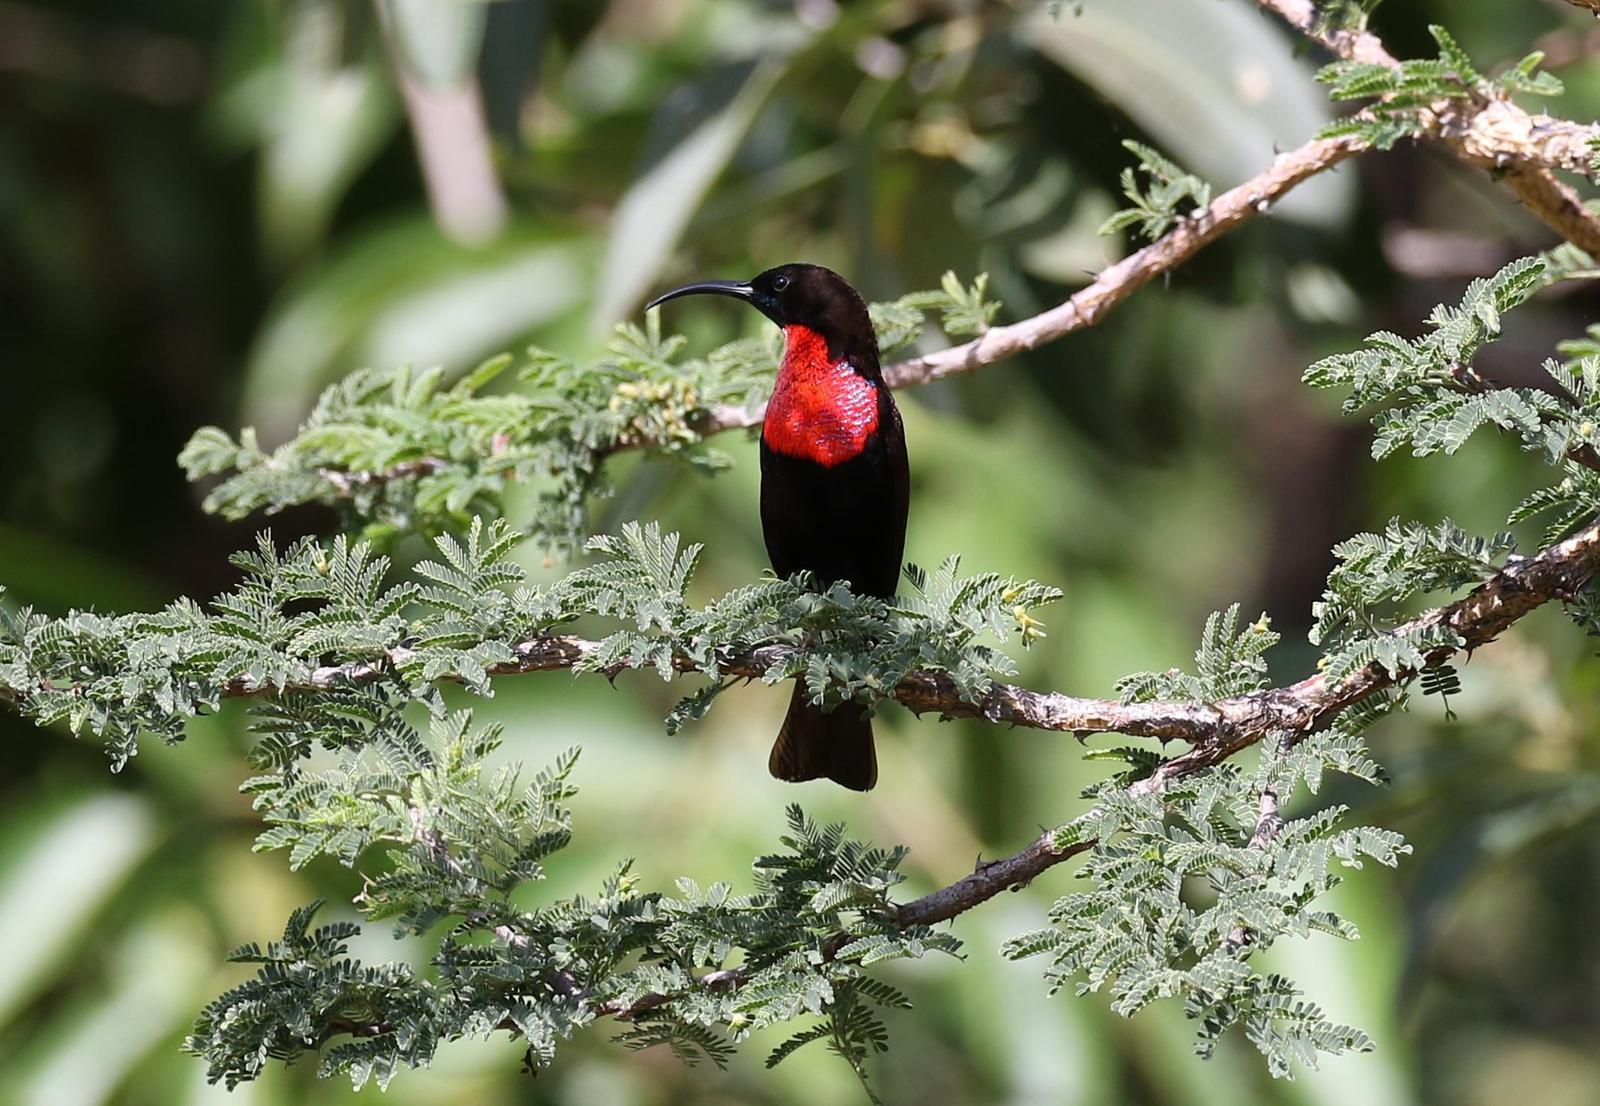 Scarlet-chested Sunbird Photo by Nate Dias